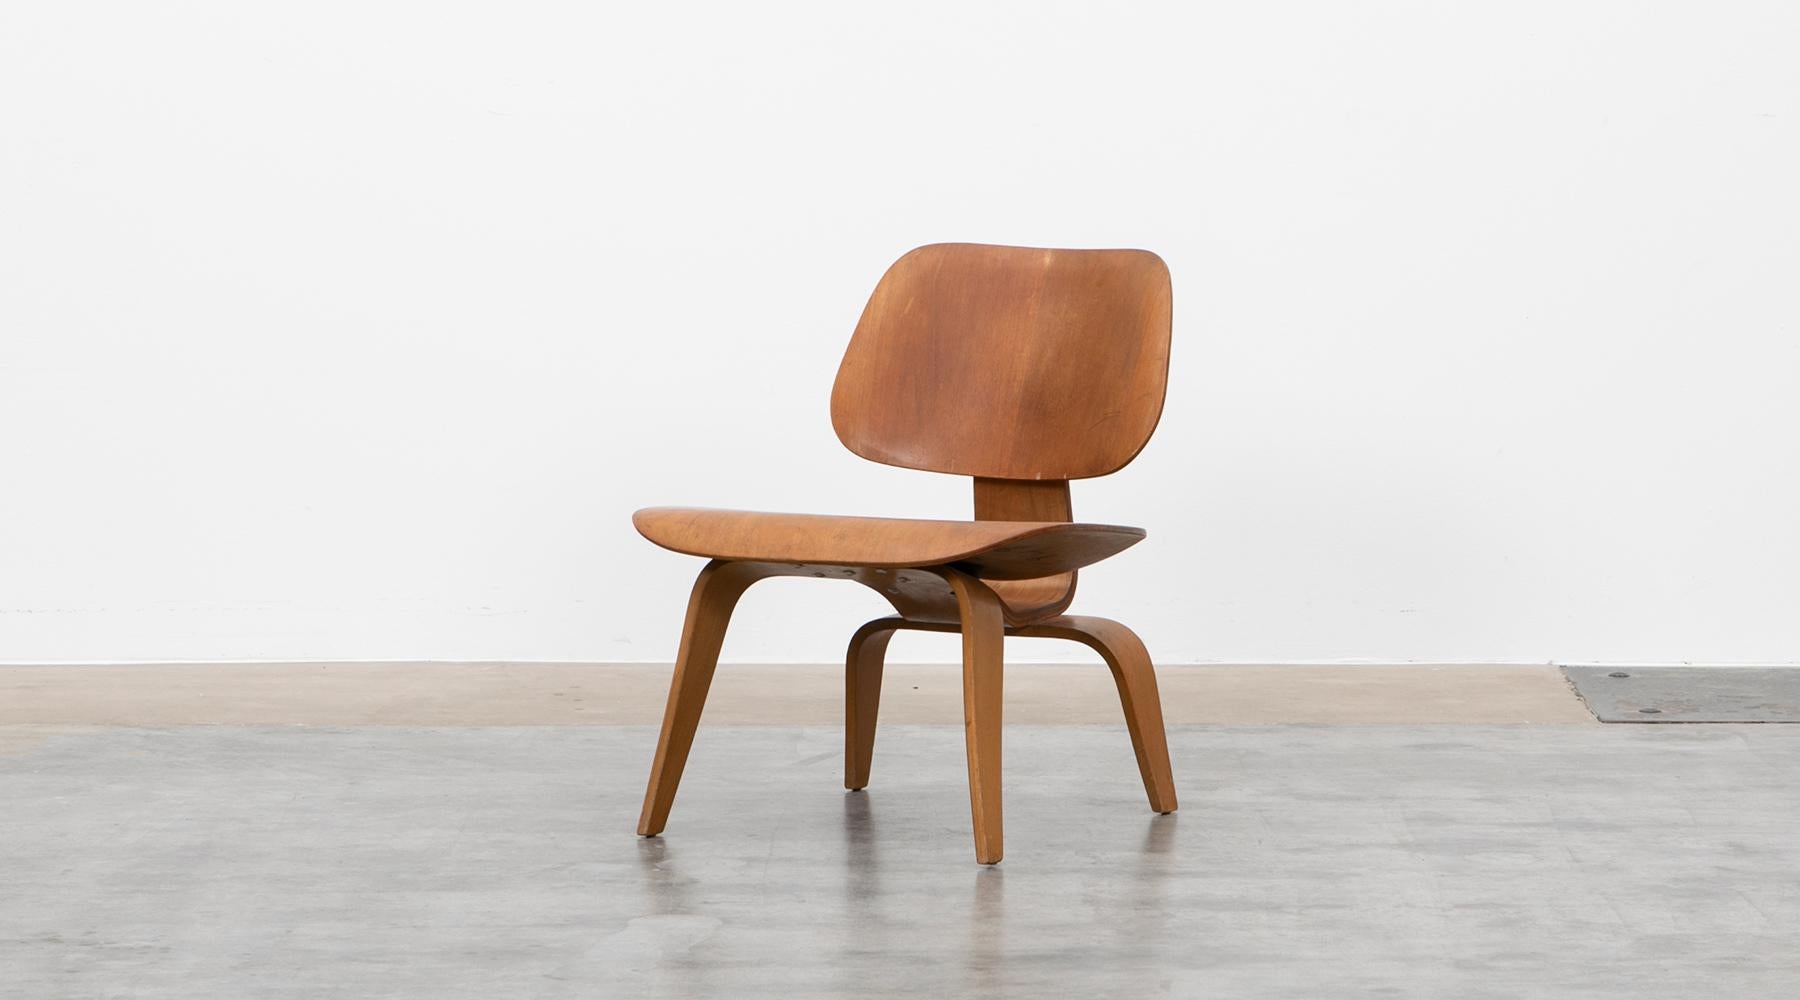 LCW chair, plywood in walnut, Charles & Ray Eames, USA, 1948.

Early example of a LCW chair by famous Charles & Ray Eames. The unusual organic shape of this object shows Charles & Ray Eames innovative use of lumber-core plywood. Manufactured by